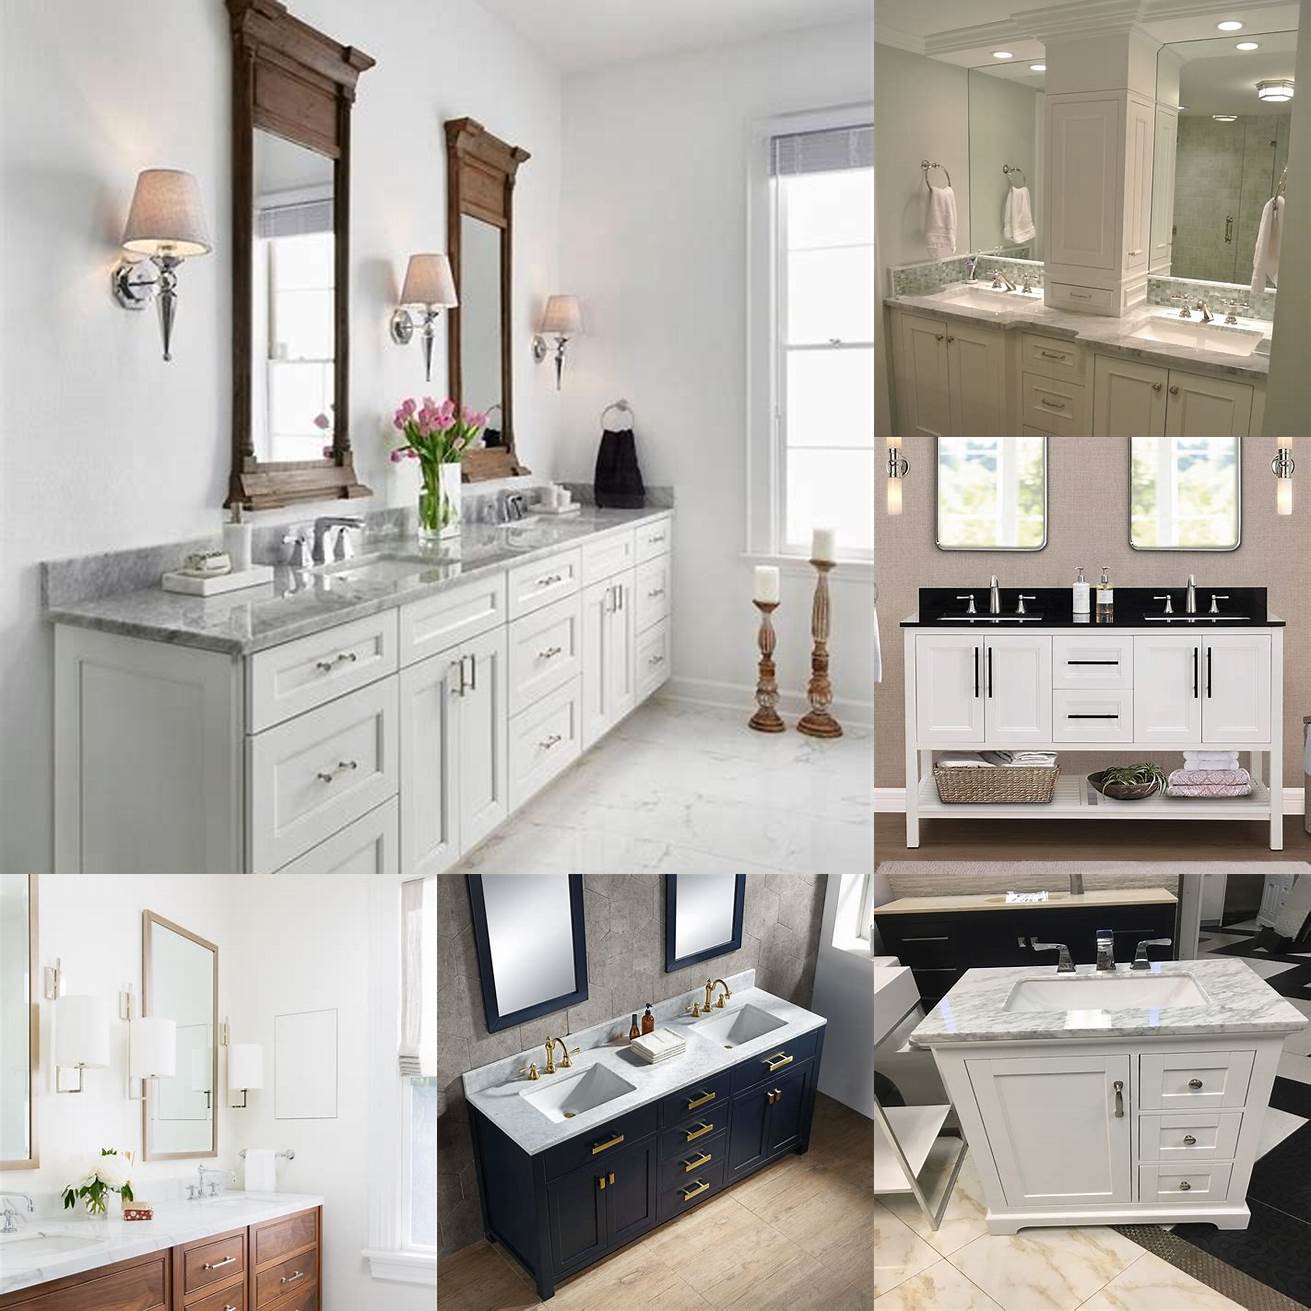 A double white vanity with marble countertops and plenty of drawer space